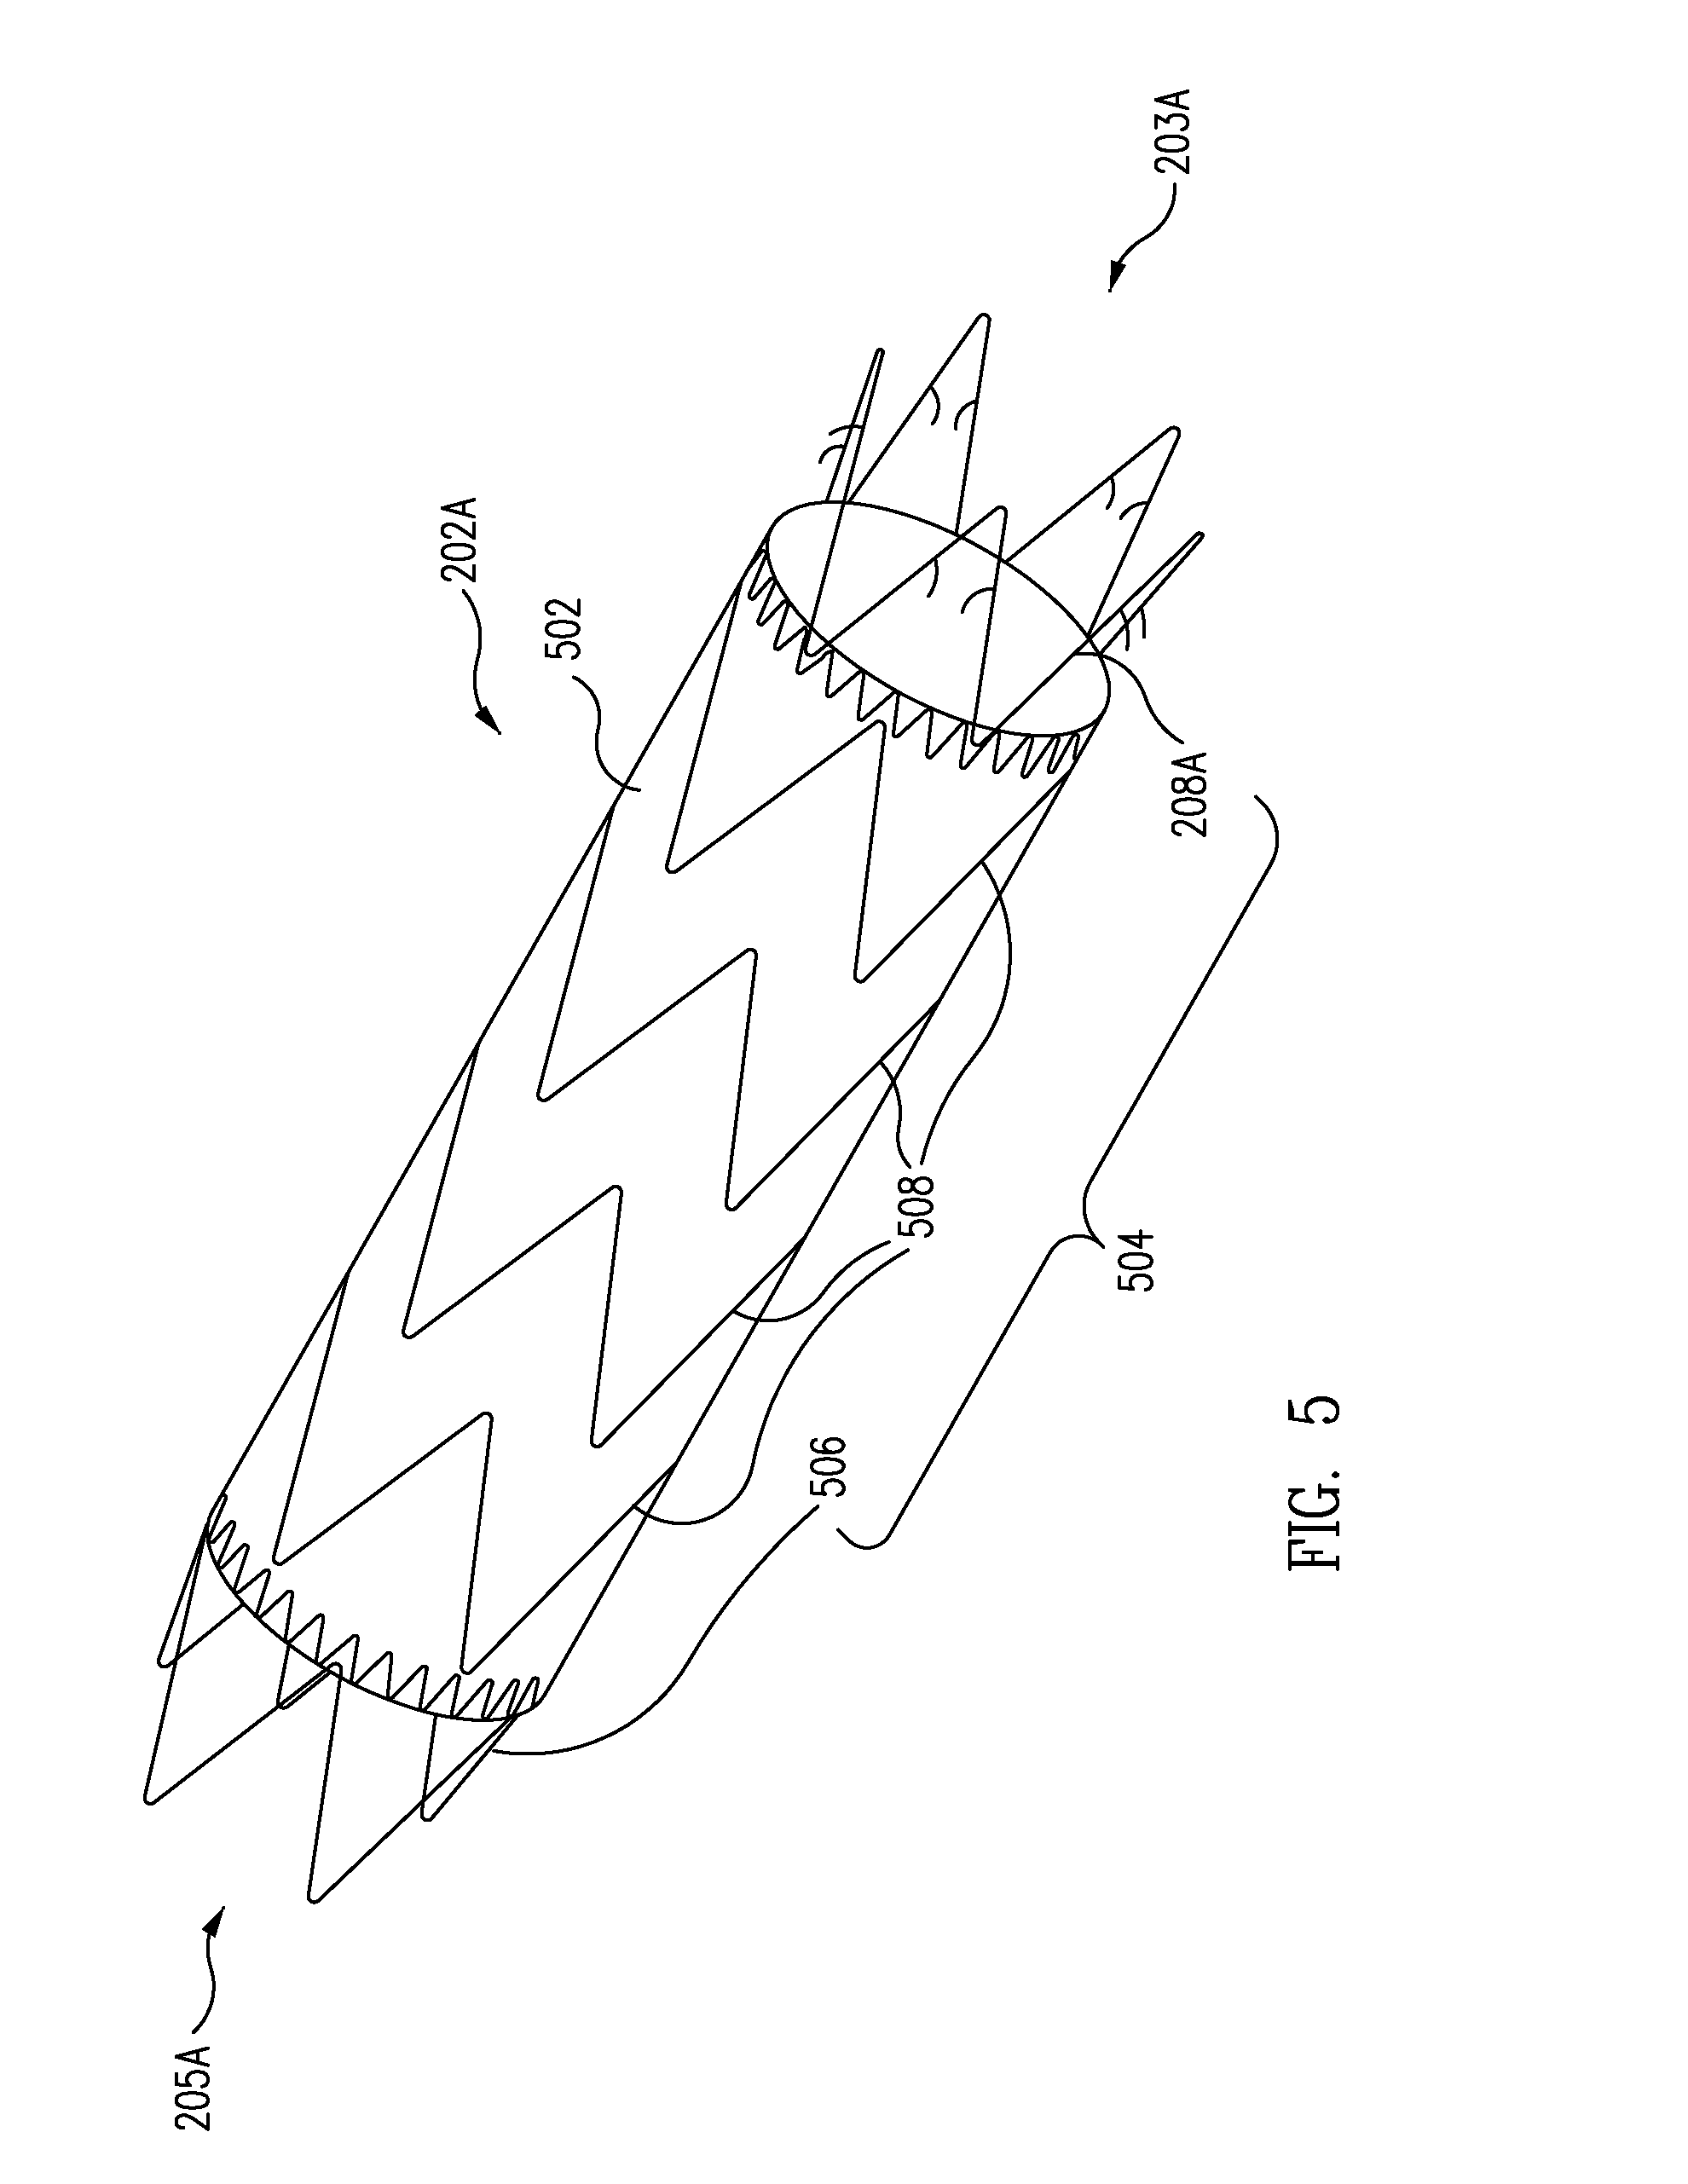 Delivery System for Stent-Graft With Anchoring Pins